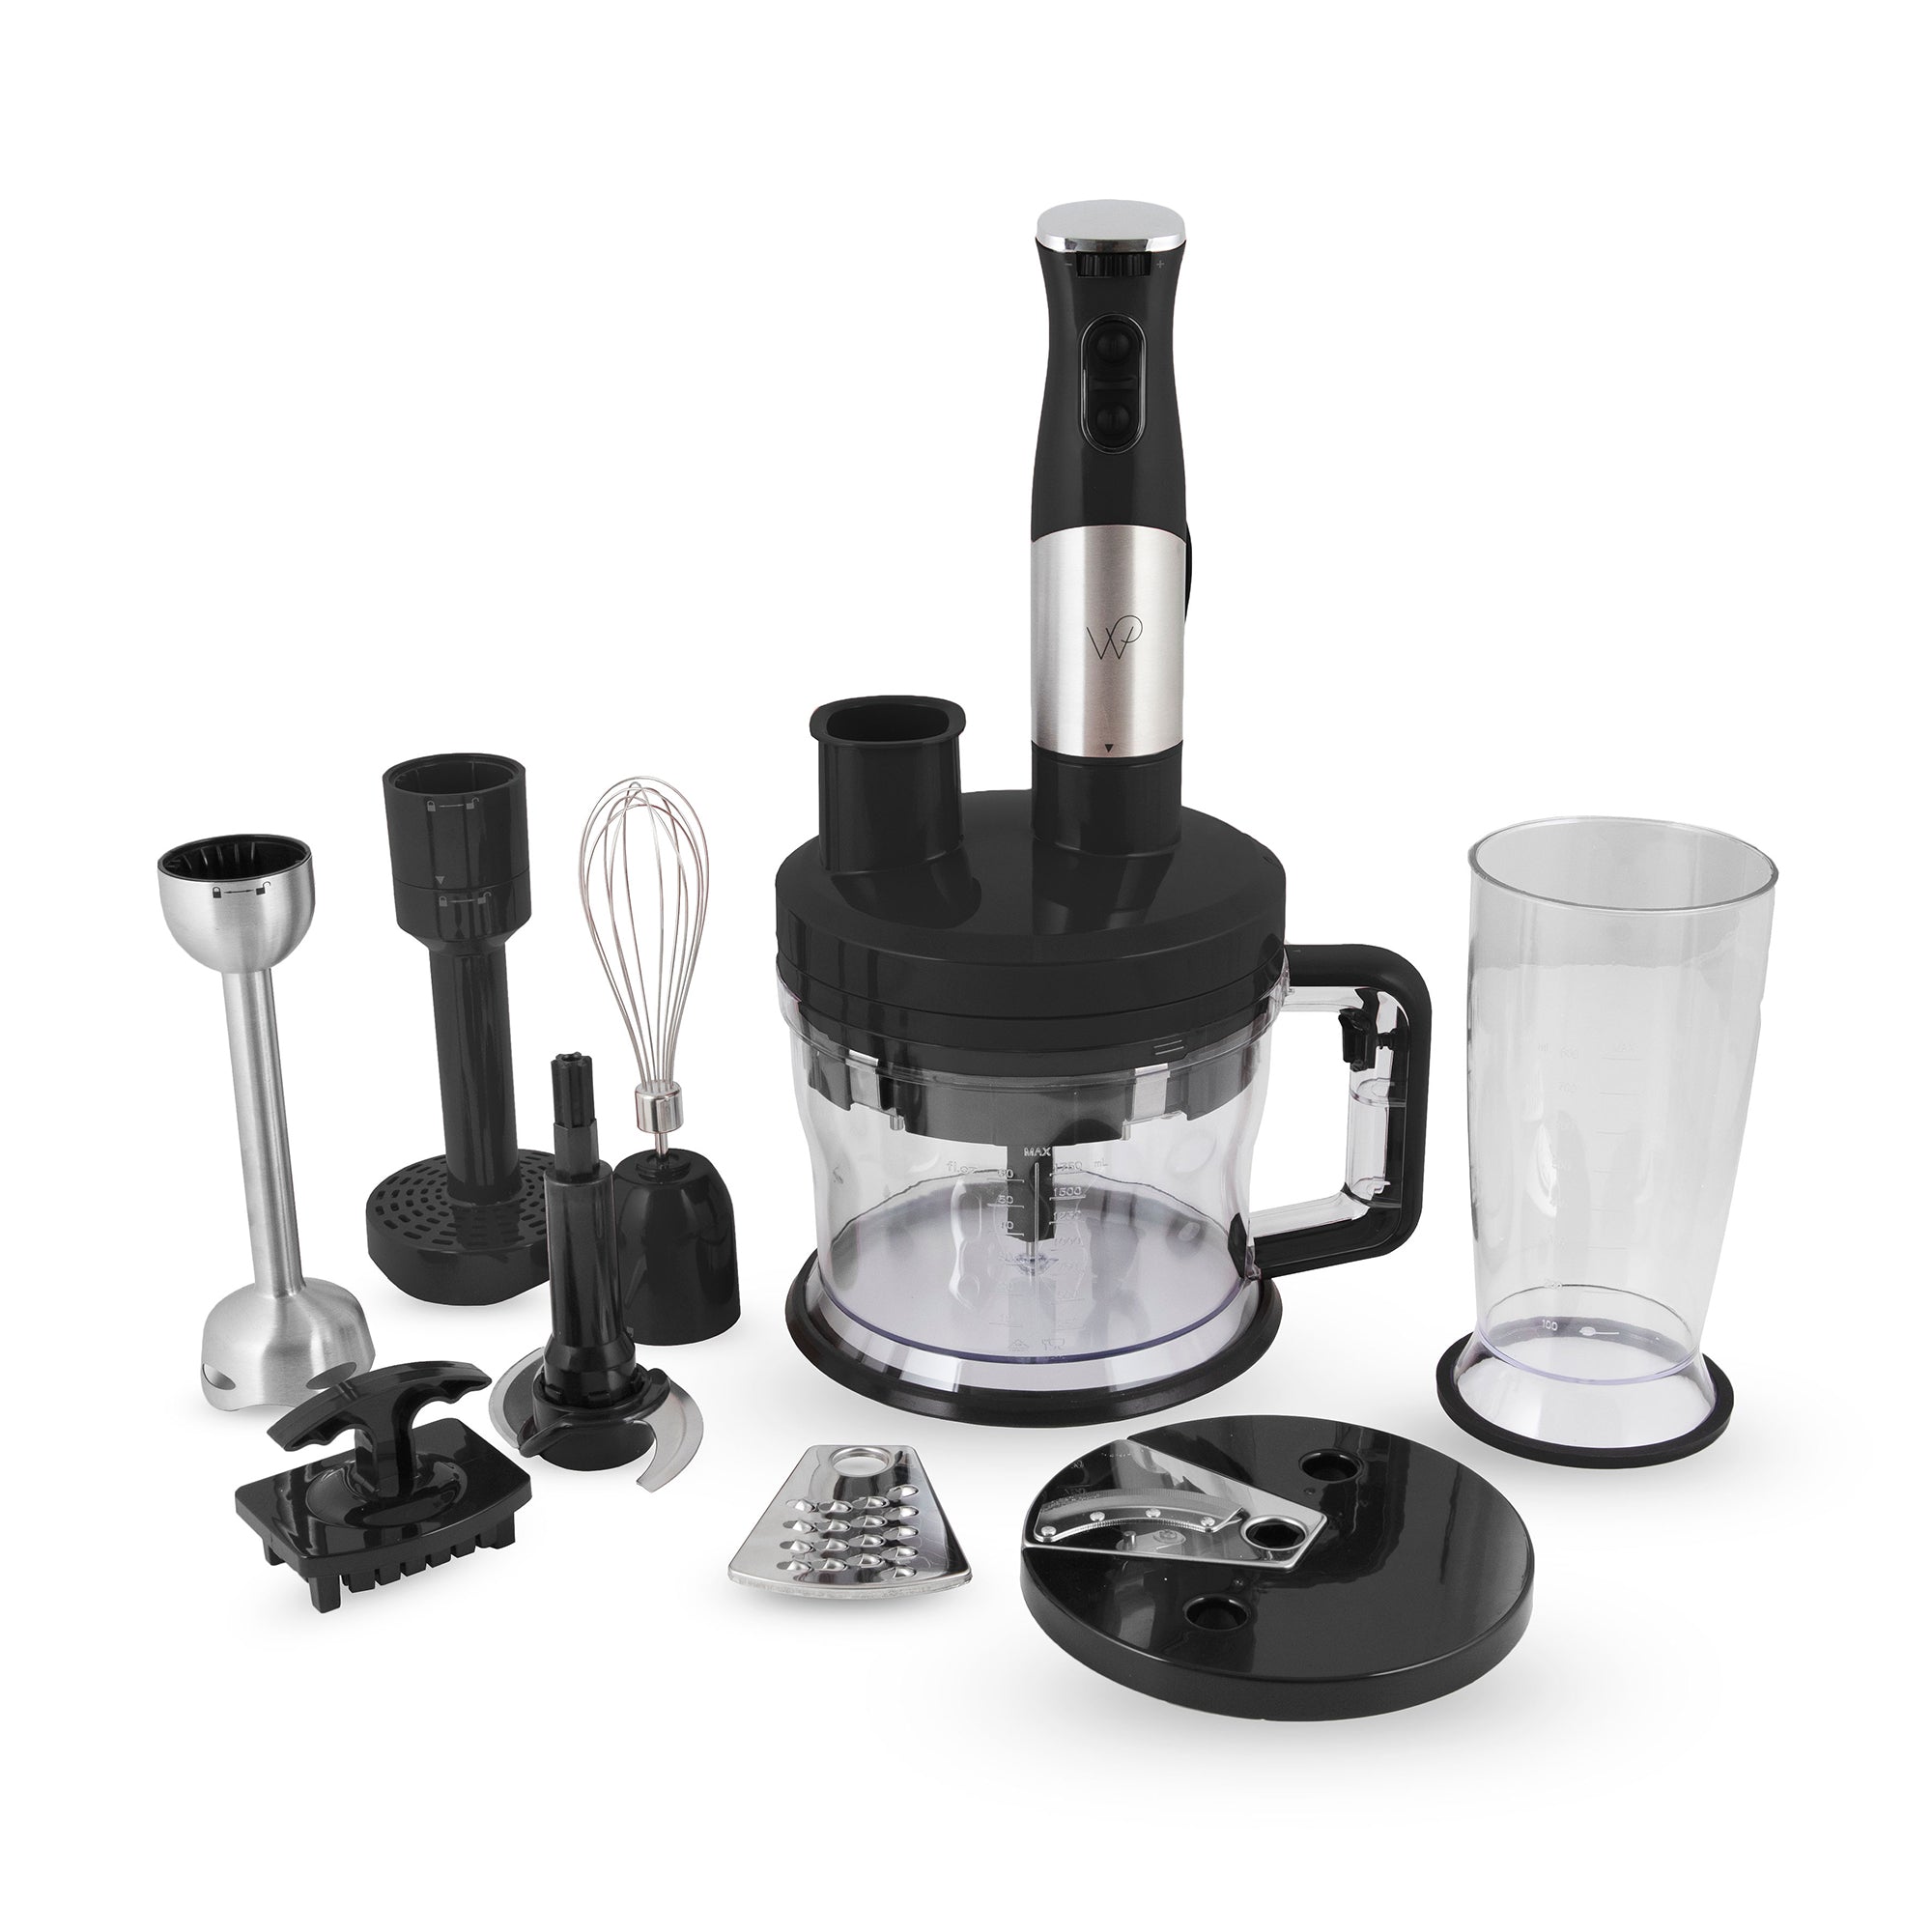 7-in-1 immersion blender by Wolfgang Puck